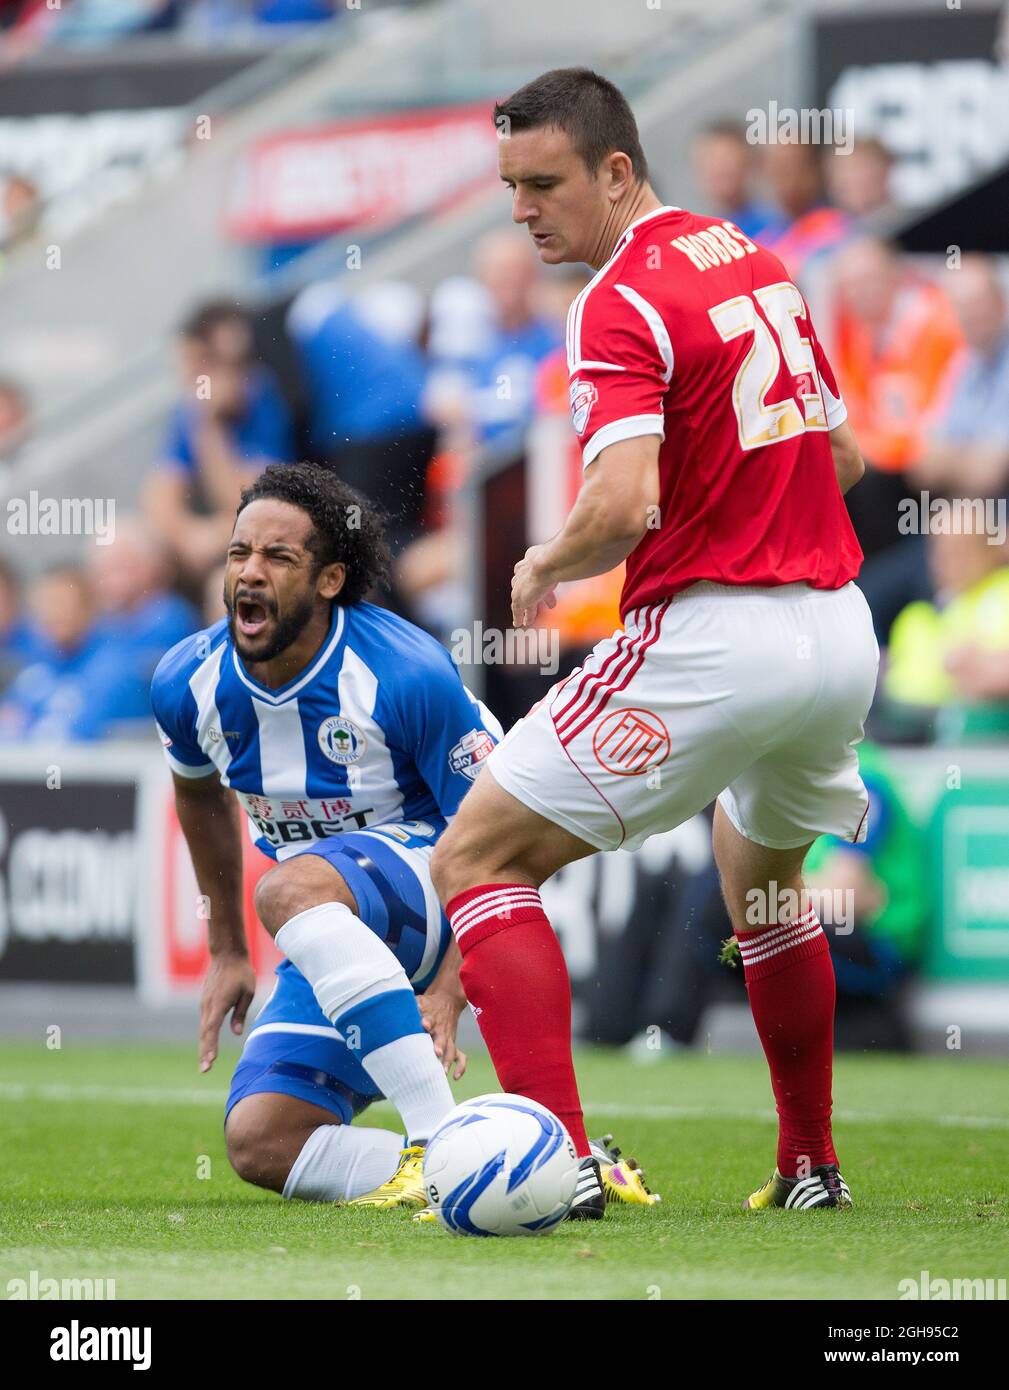 Forest's Jack Hobbs challenges Wigan's Jean Beausejour during the Sky Bet Football League Championship match between Wigan Athletic and Nottingham Forest at the DW Stadium, Wigan on August 31, 2013. Stock Photo